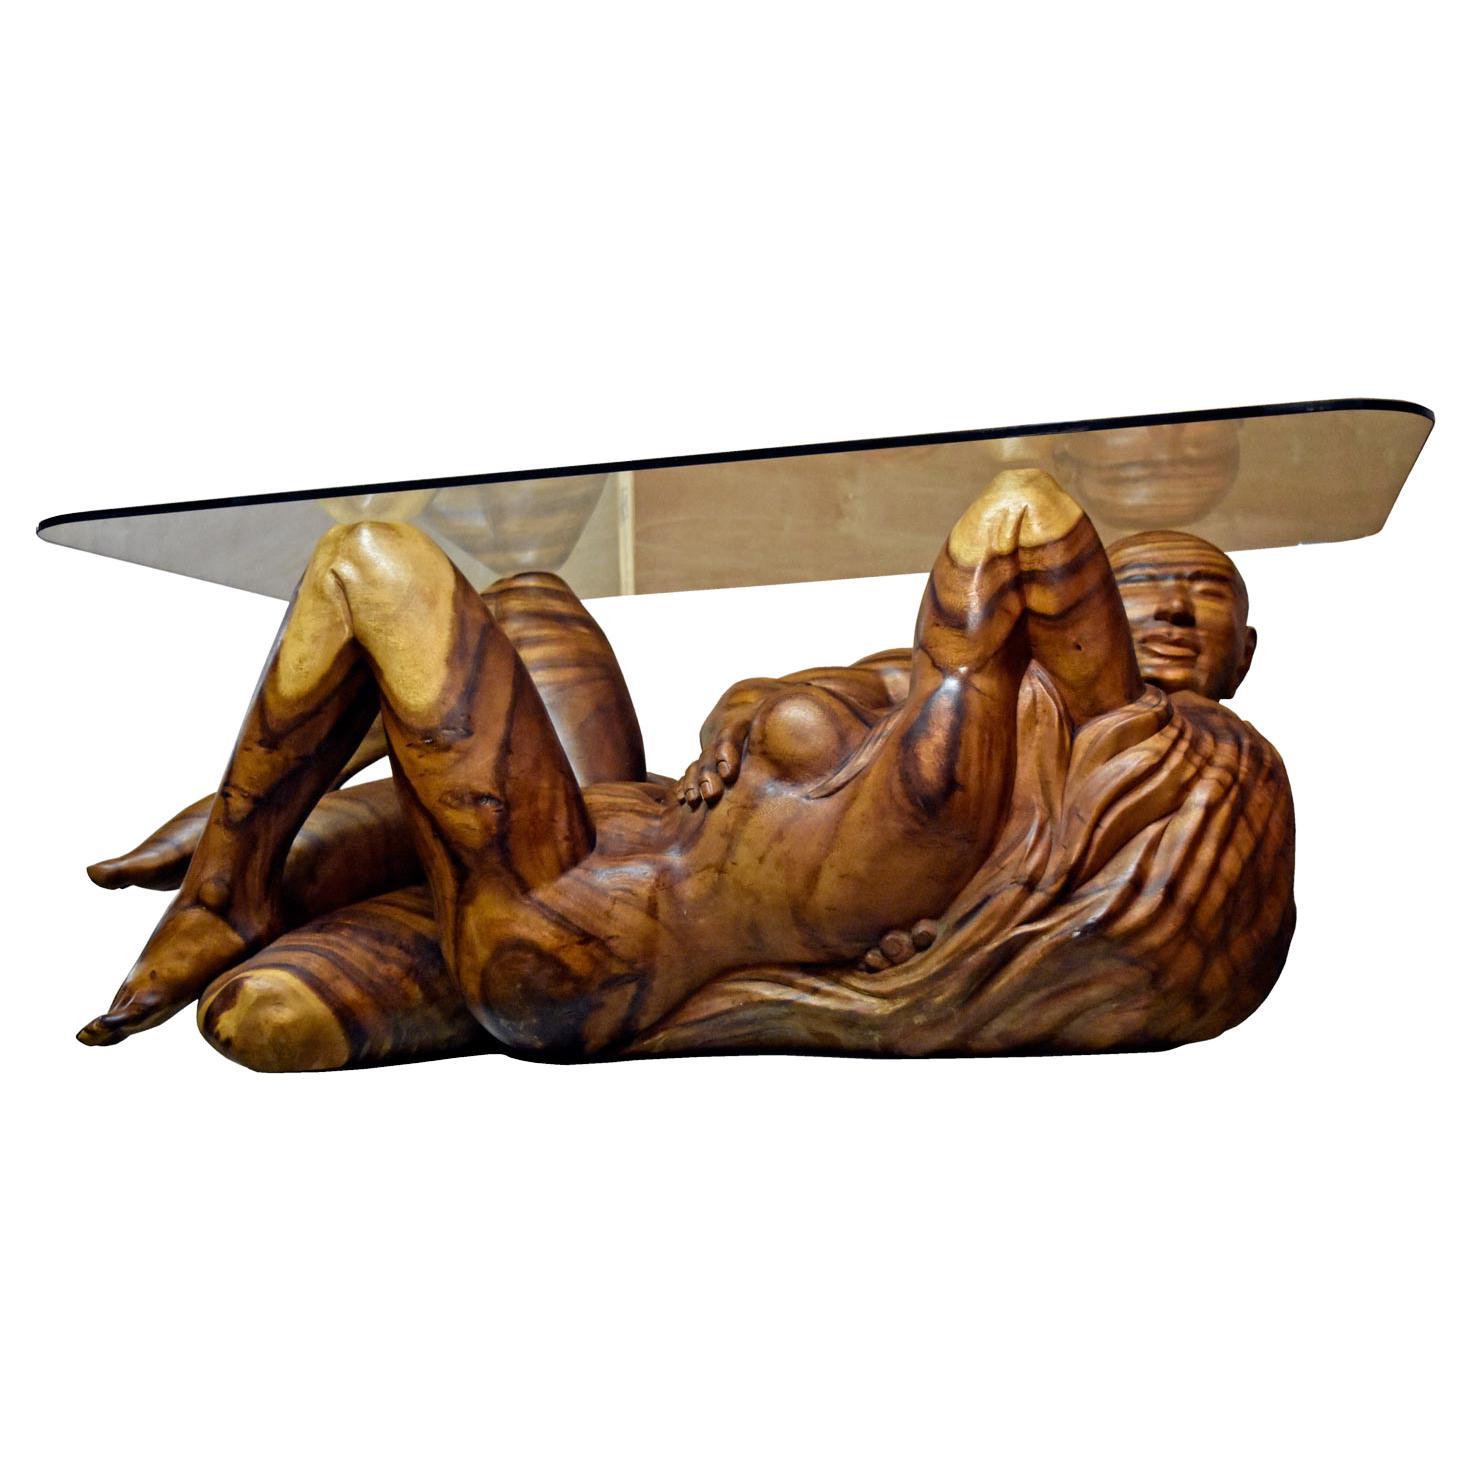 Masterfully hand carved from what must have been a colossal solid piece of monkey pod hardwood. This nude figural sculpture weighs around 250 lbs. Although our photos are an adequate representation, the authentic real life presentation of this work